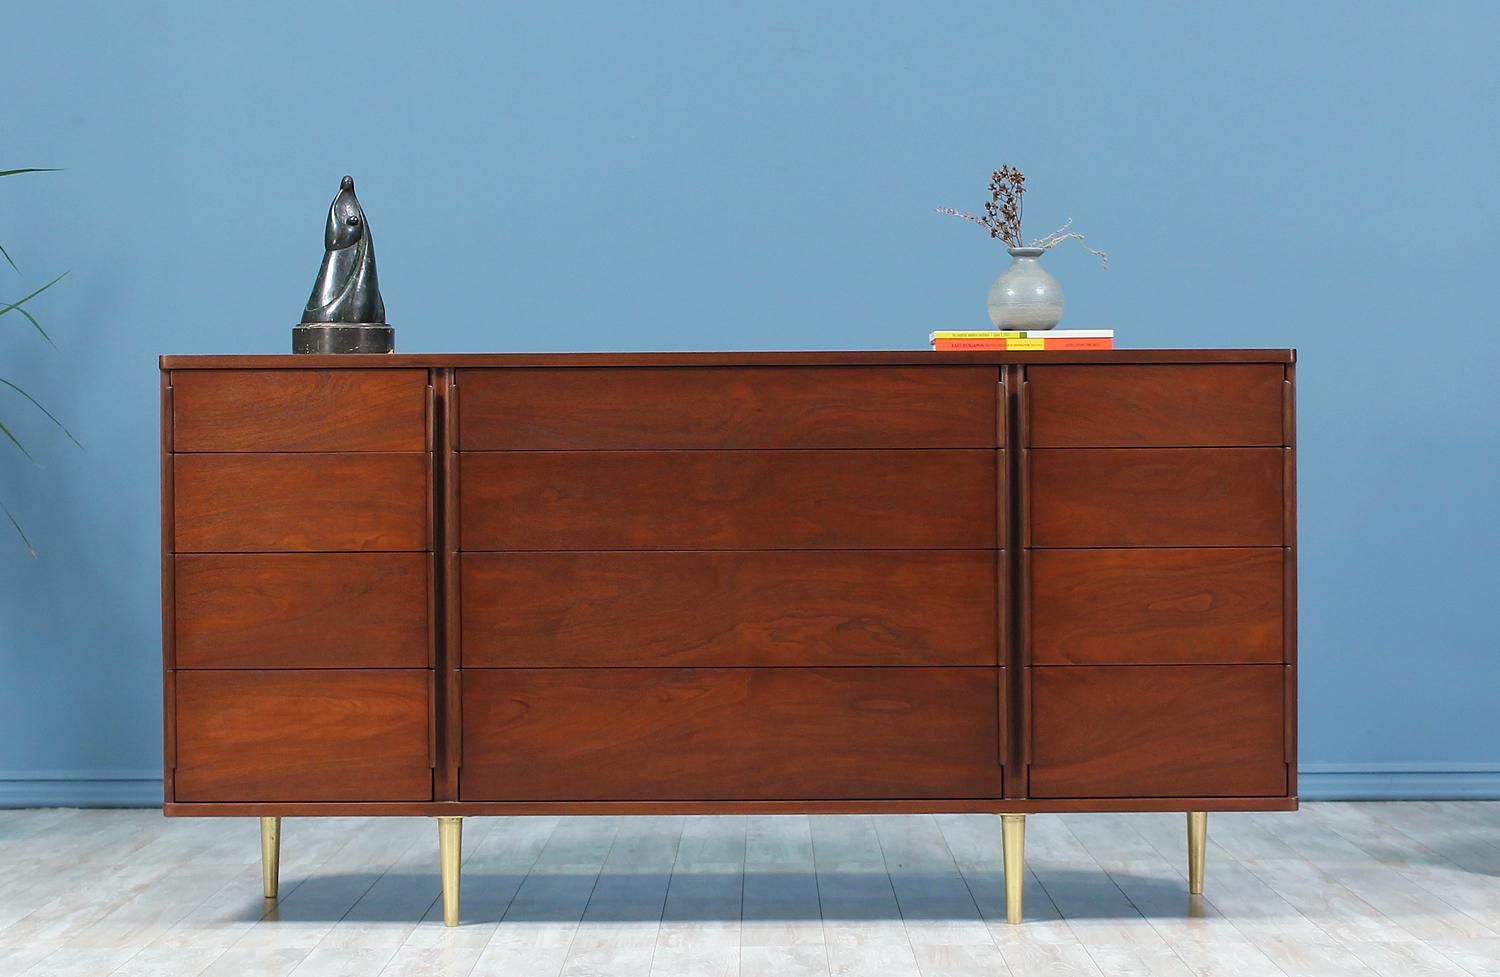 Beautiful dresser designed by Edward J. Wormley for Dunbar in the United States circa 1950’s. Featuring twelve spacious drawers that gradually increase in depth. This walnut-stained mahogany wood dresser features laminated bentwood pulls along the